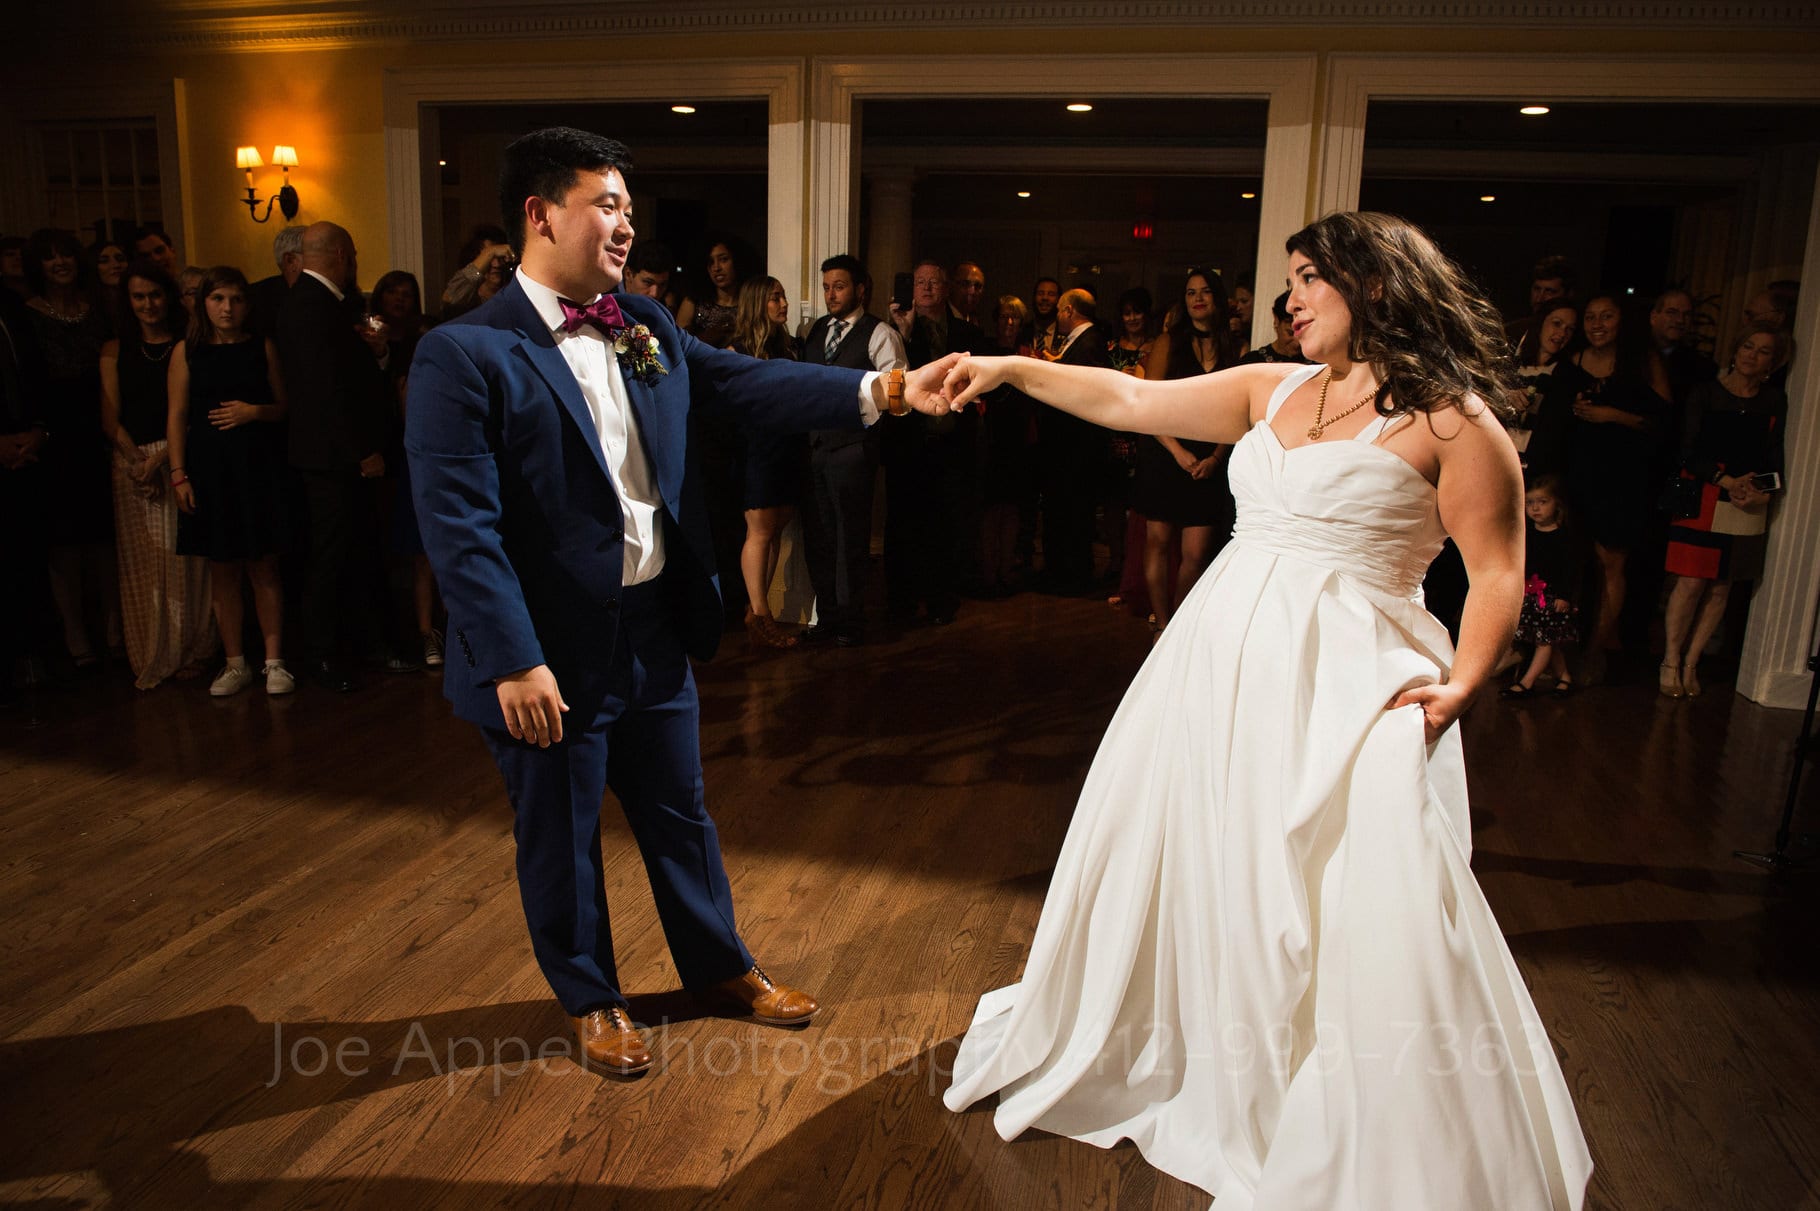 Bride and groom stretch out their arms as they hold hands while dancing